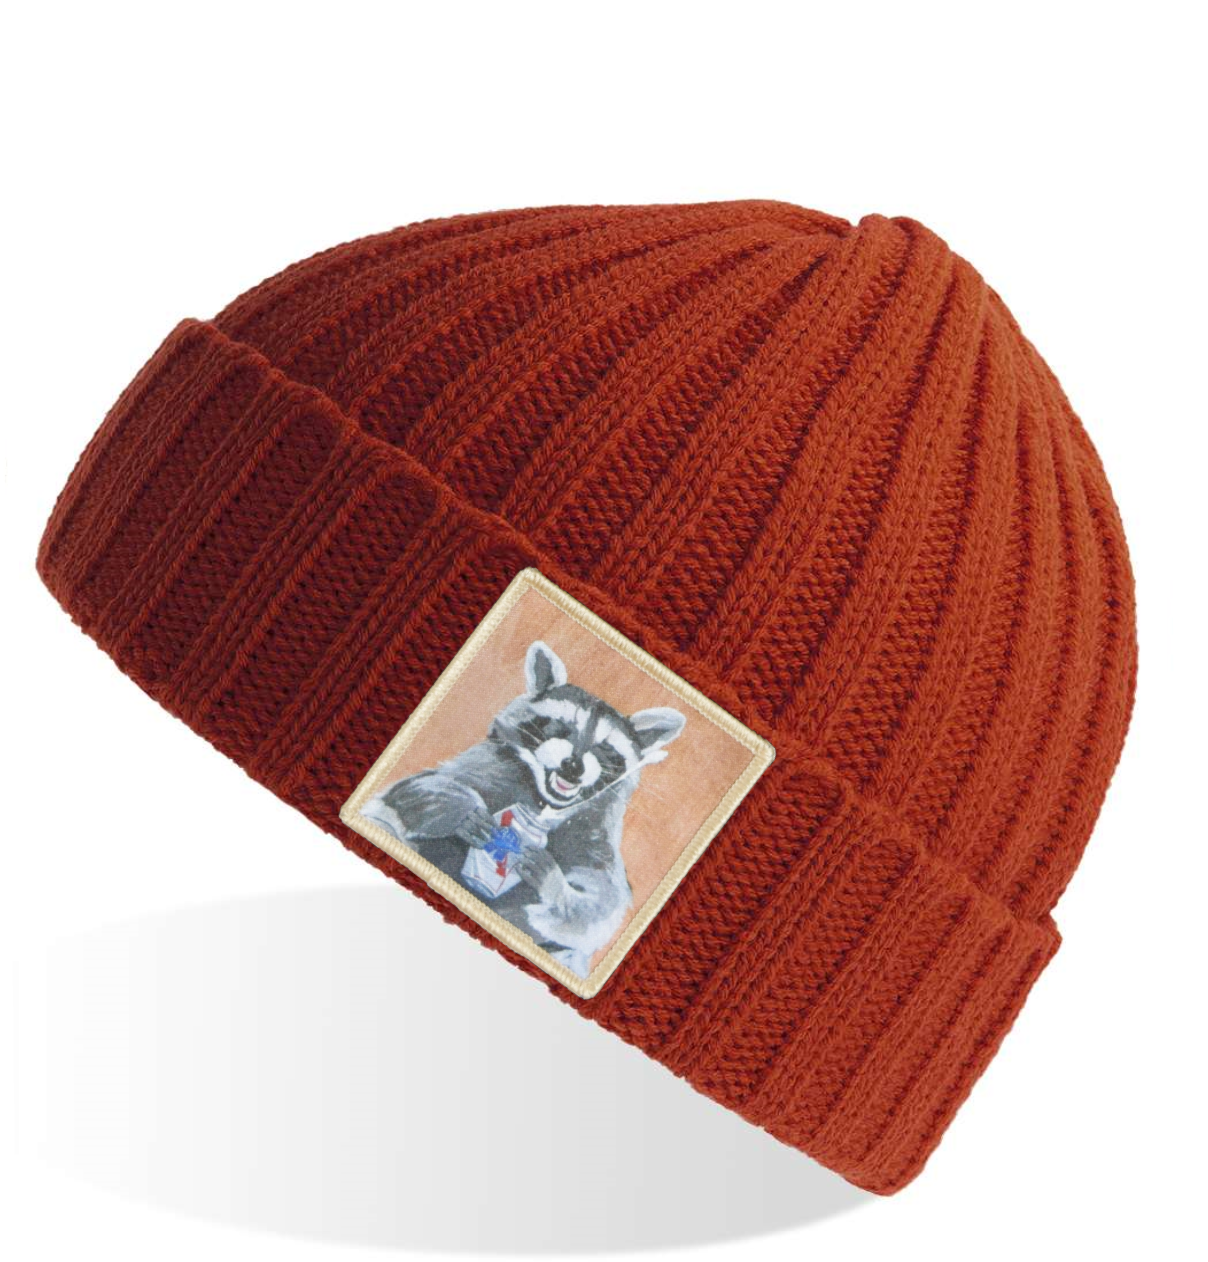 Rusty Sustainable Cable Knit Beanie Hats Flyn Costello Beer Bandit  